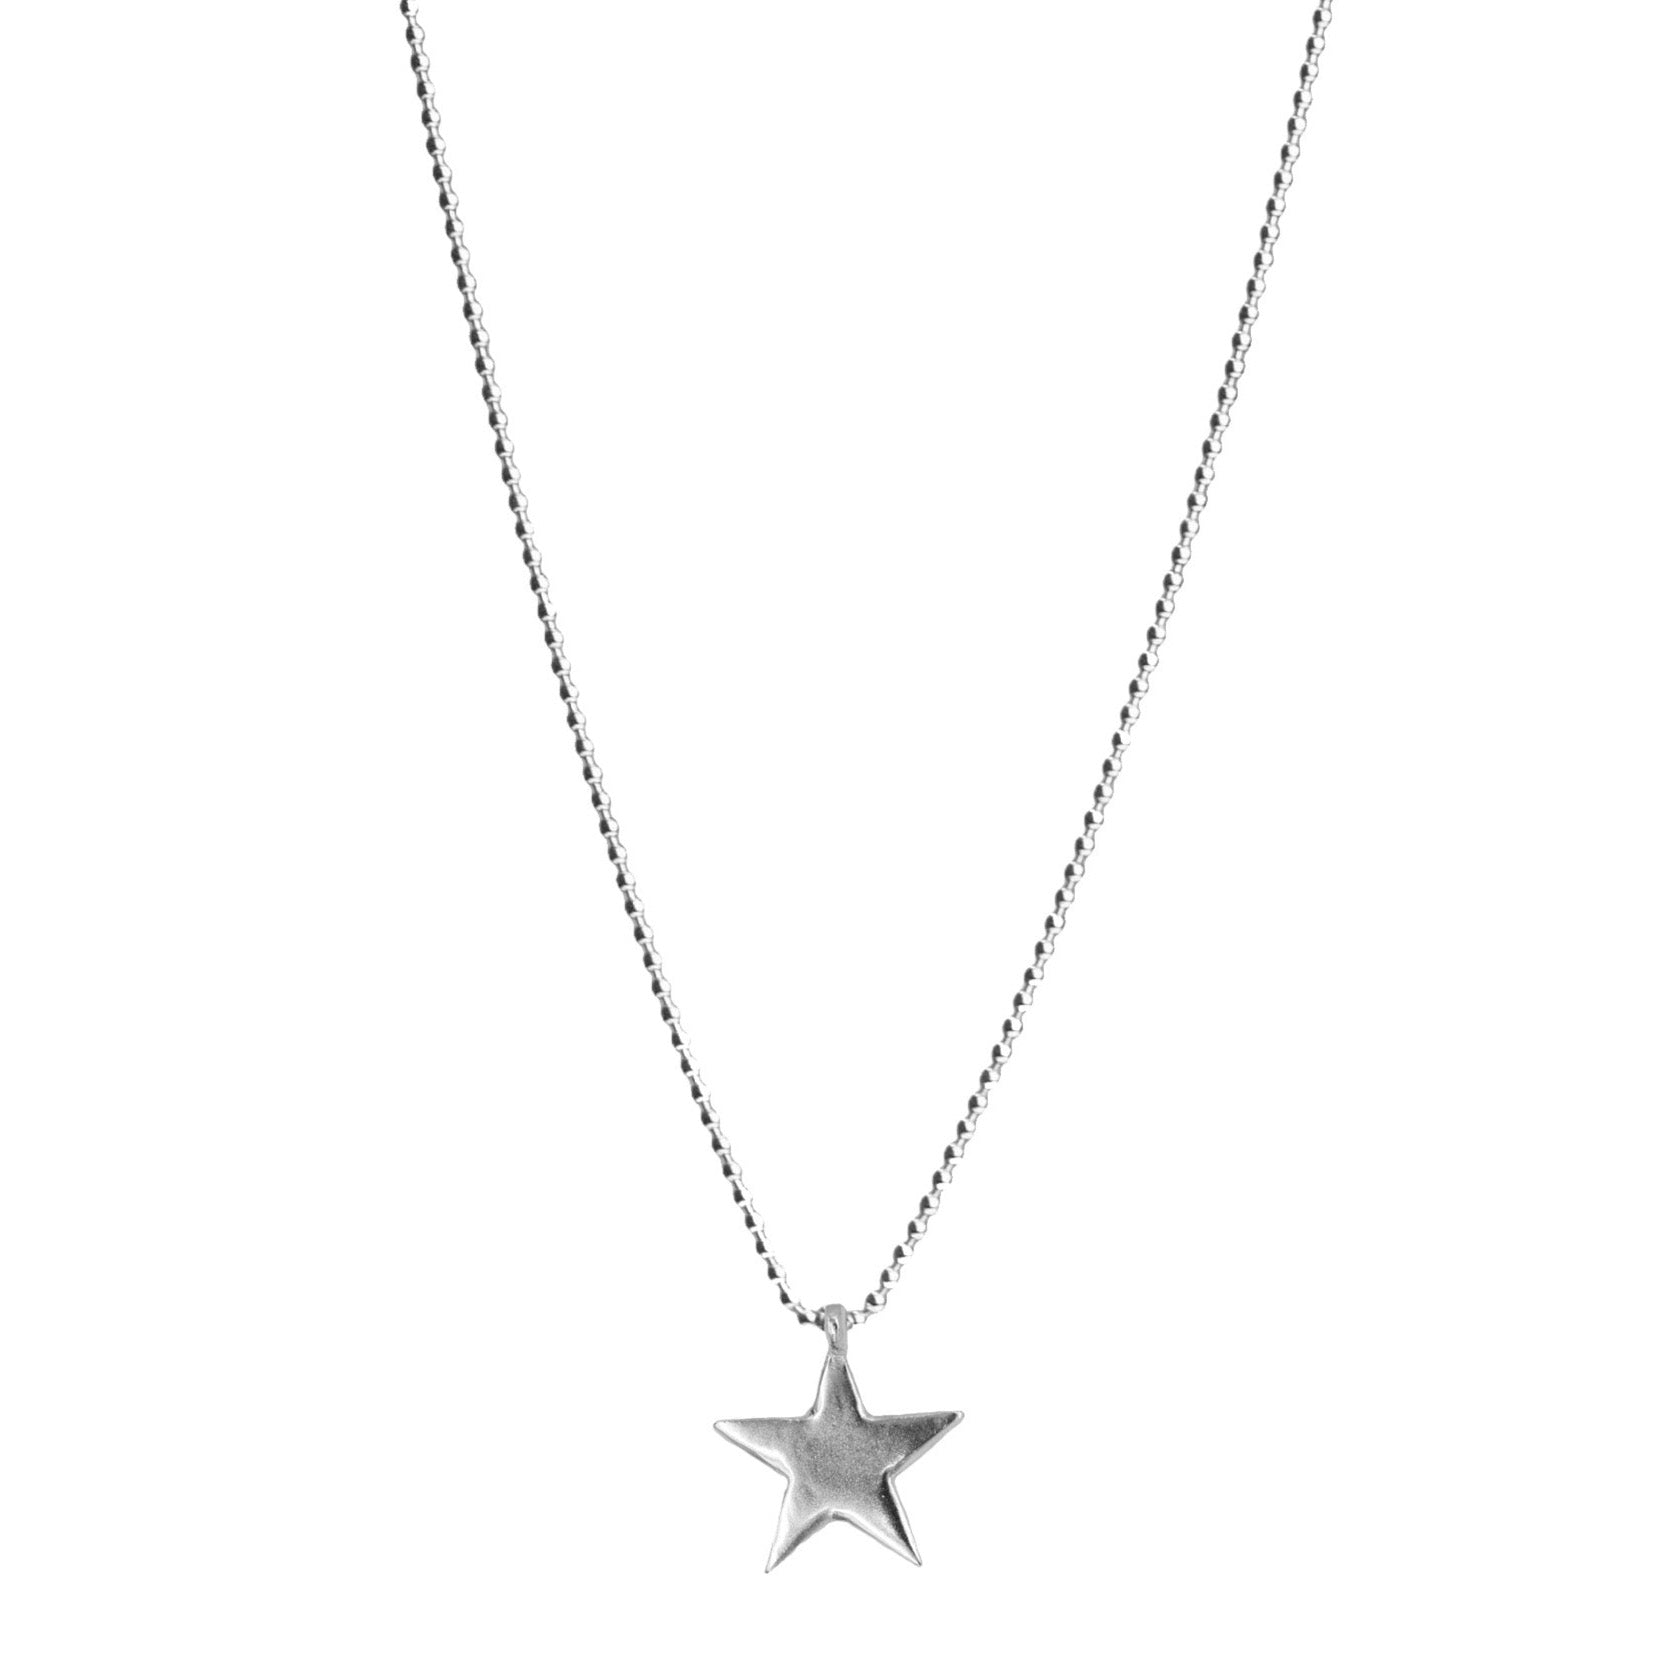 Belle & Bee Sterling Silver Ball Chain necklace with Maxi Star charm